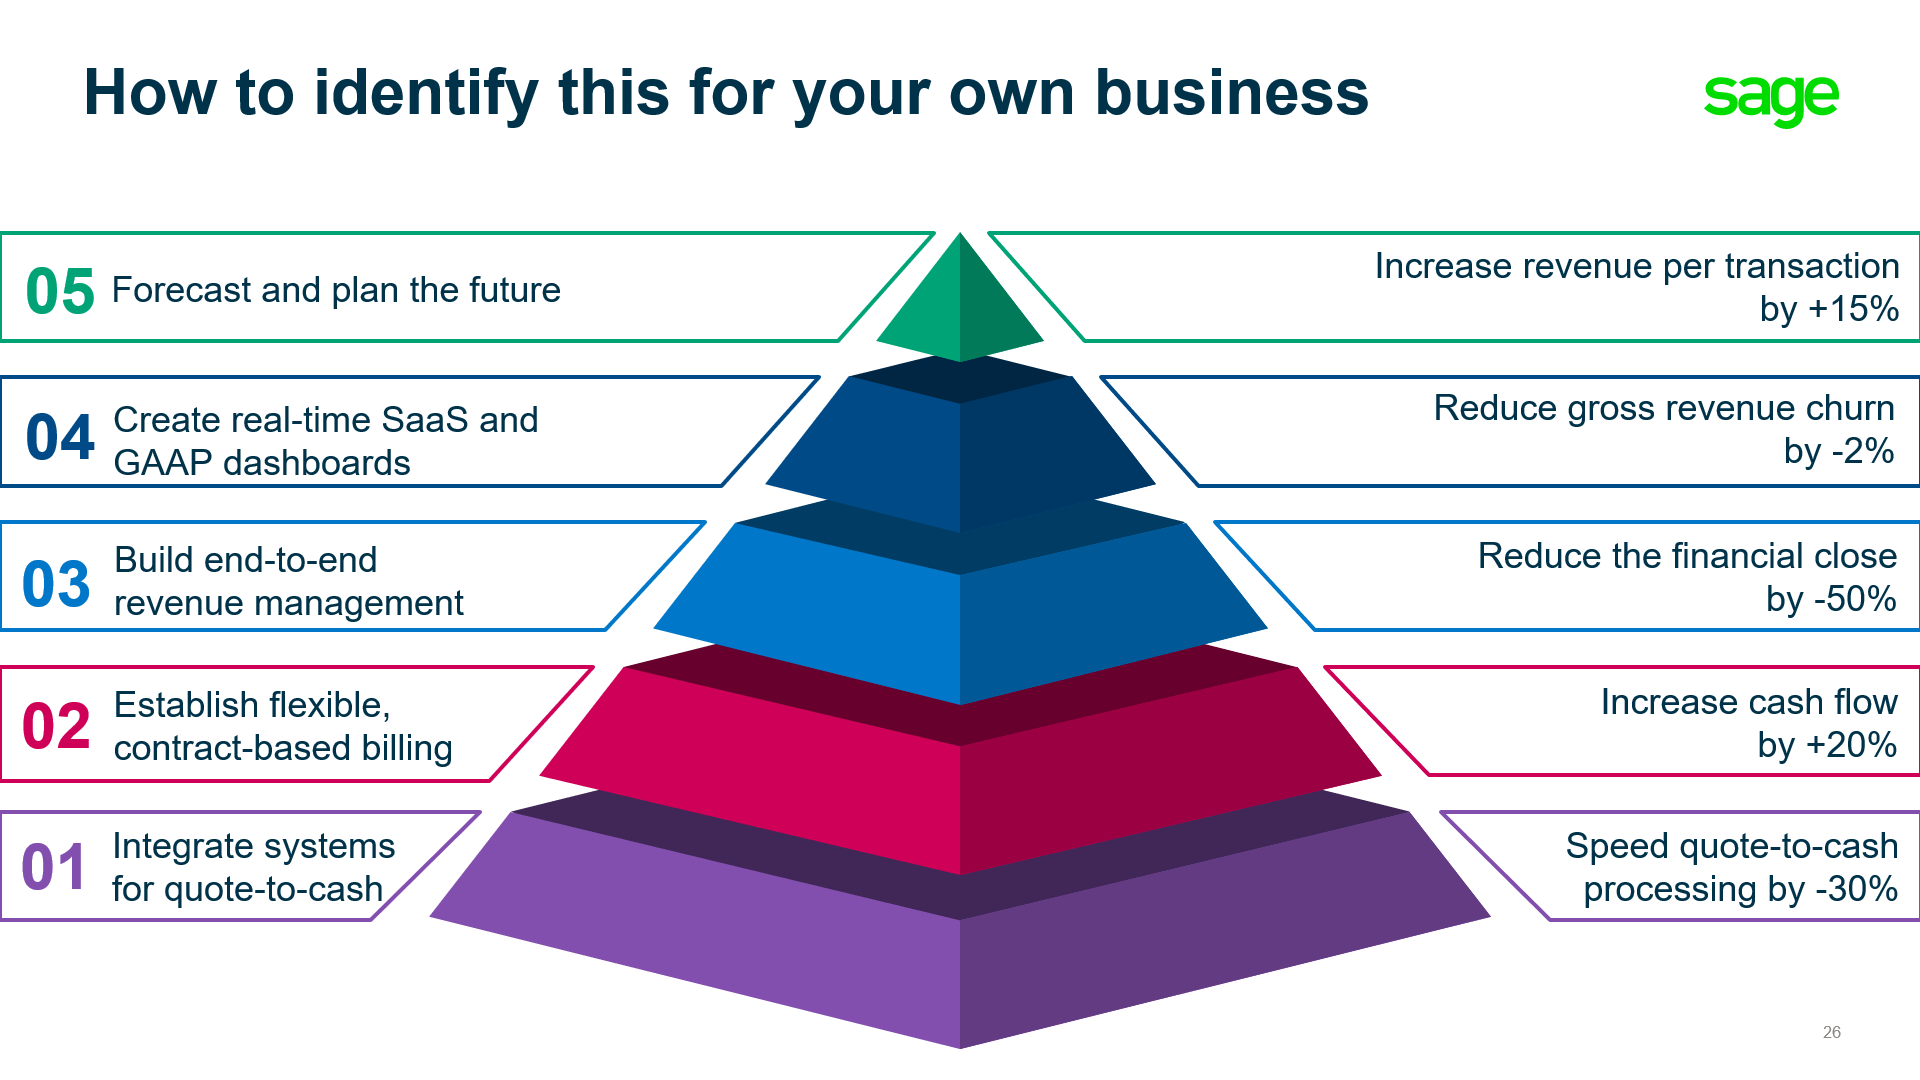 How to identify this for your business